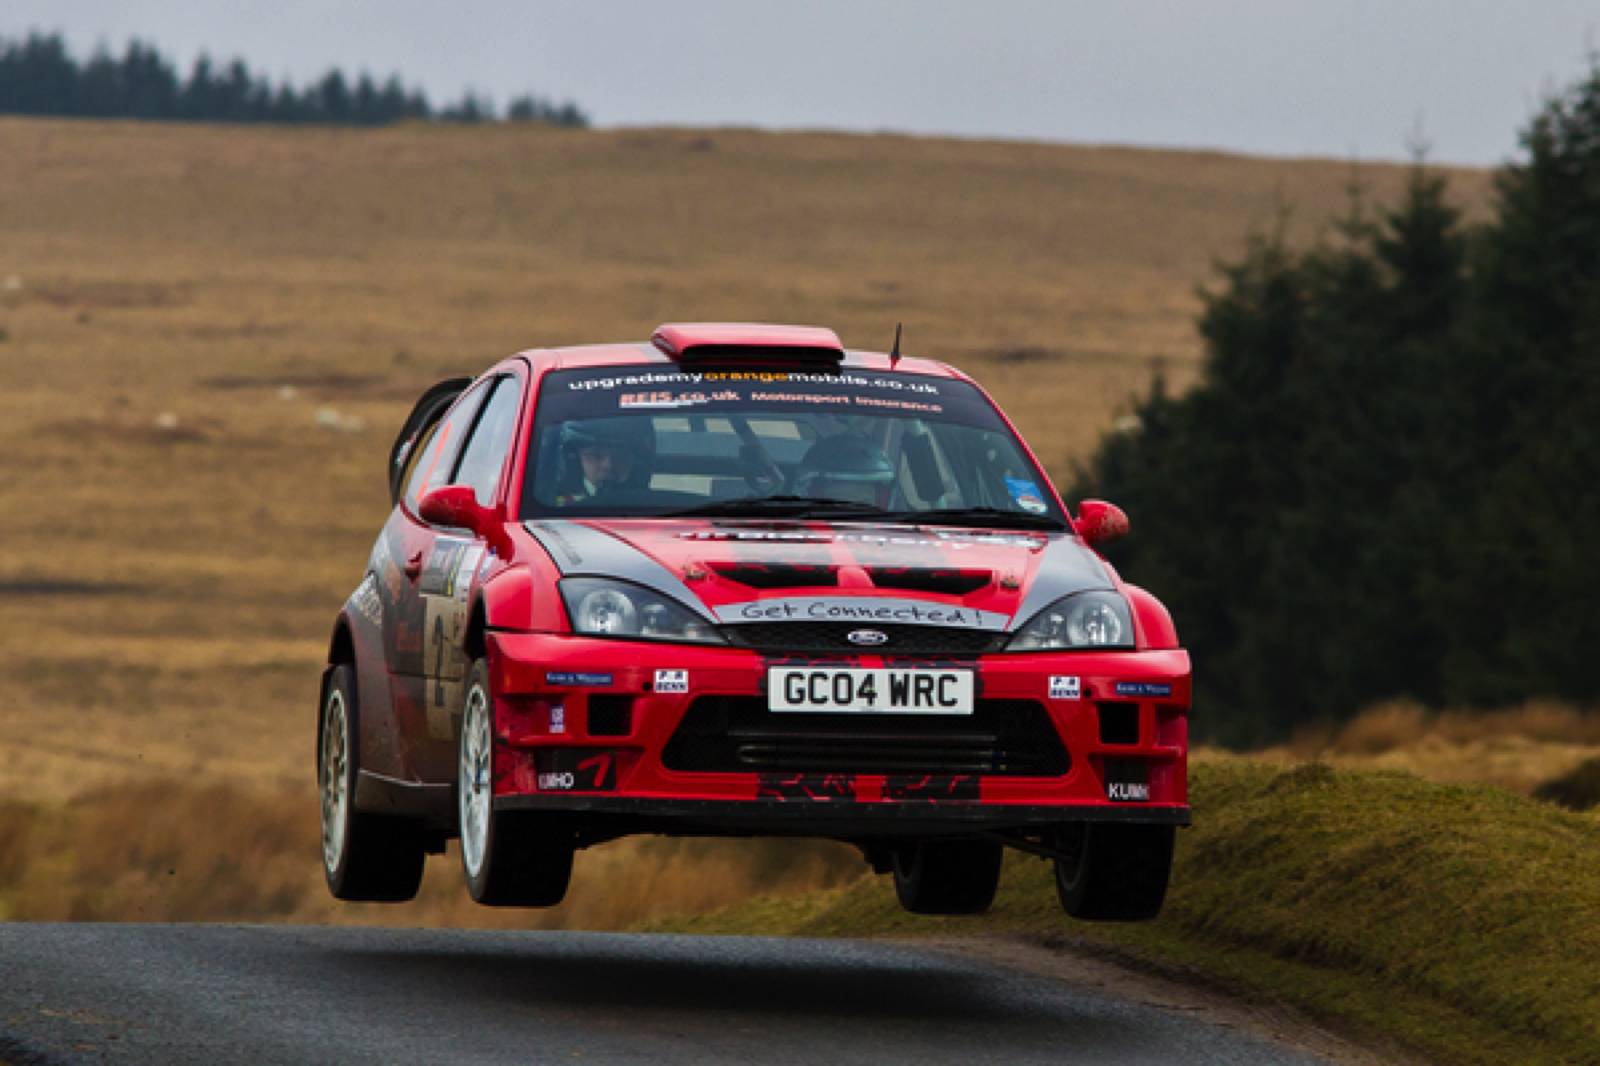 get-connected-rally-team-gallery-tou-of-epynt-2011-00010